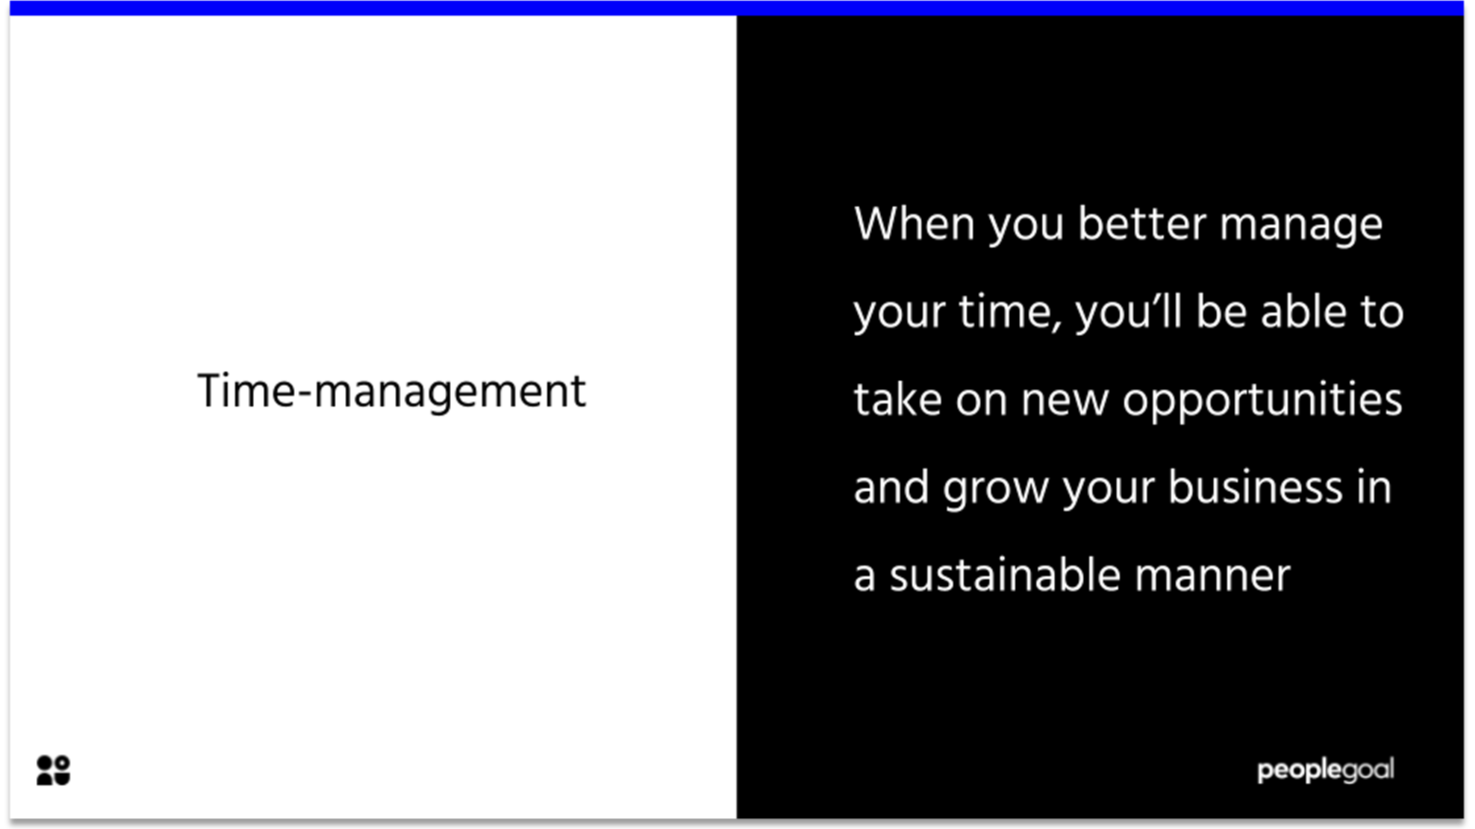 time-management - manager comments for the next review cycle